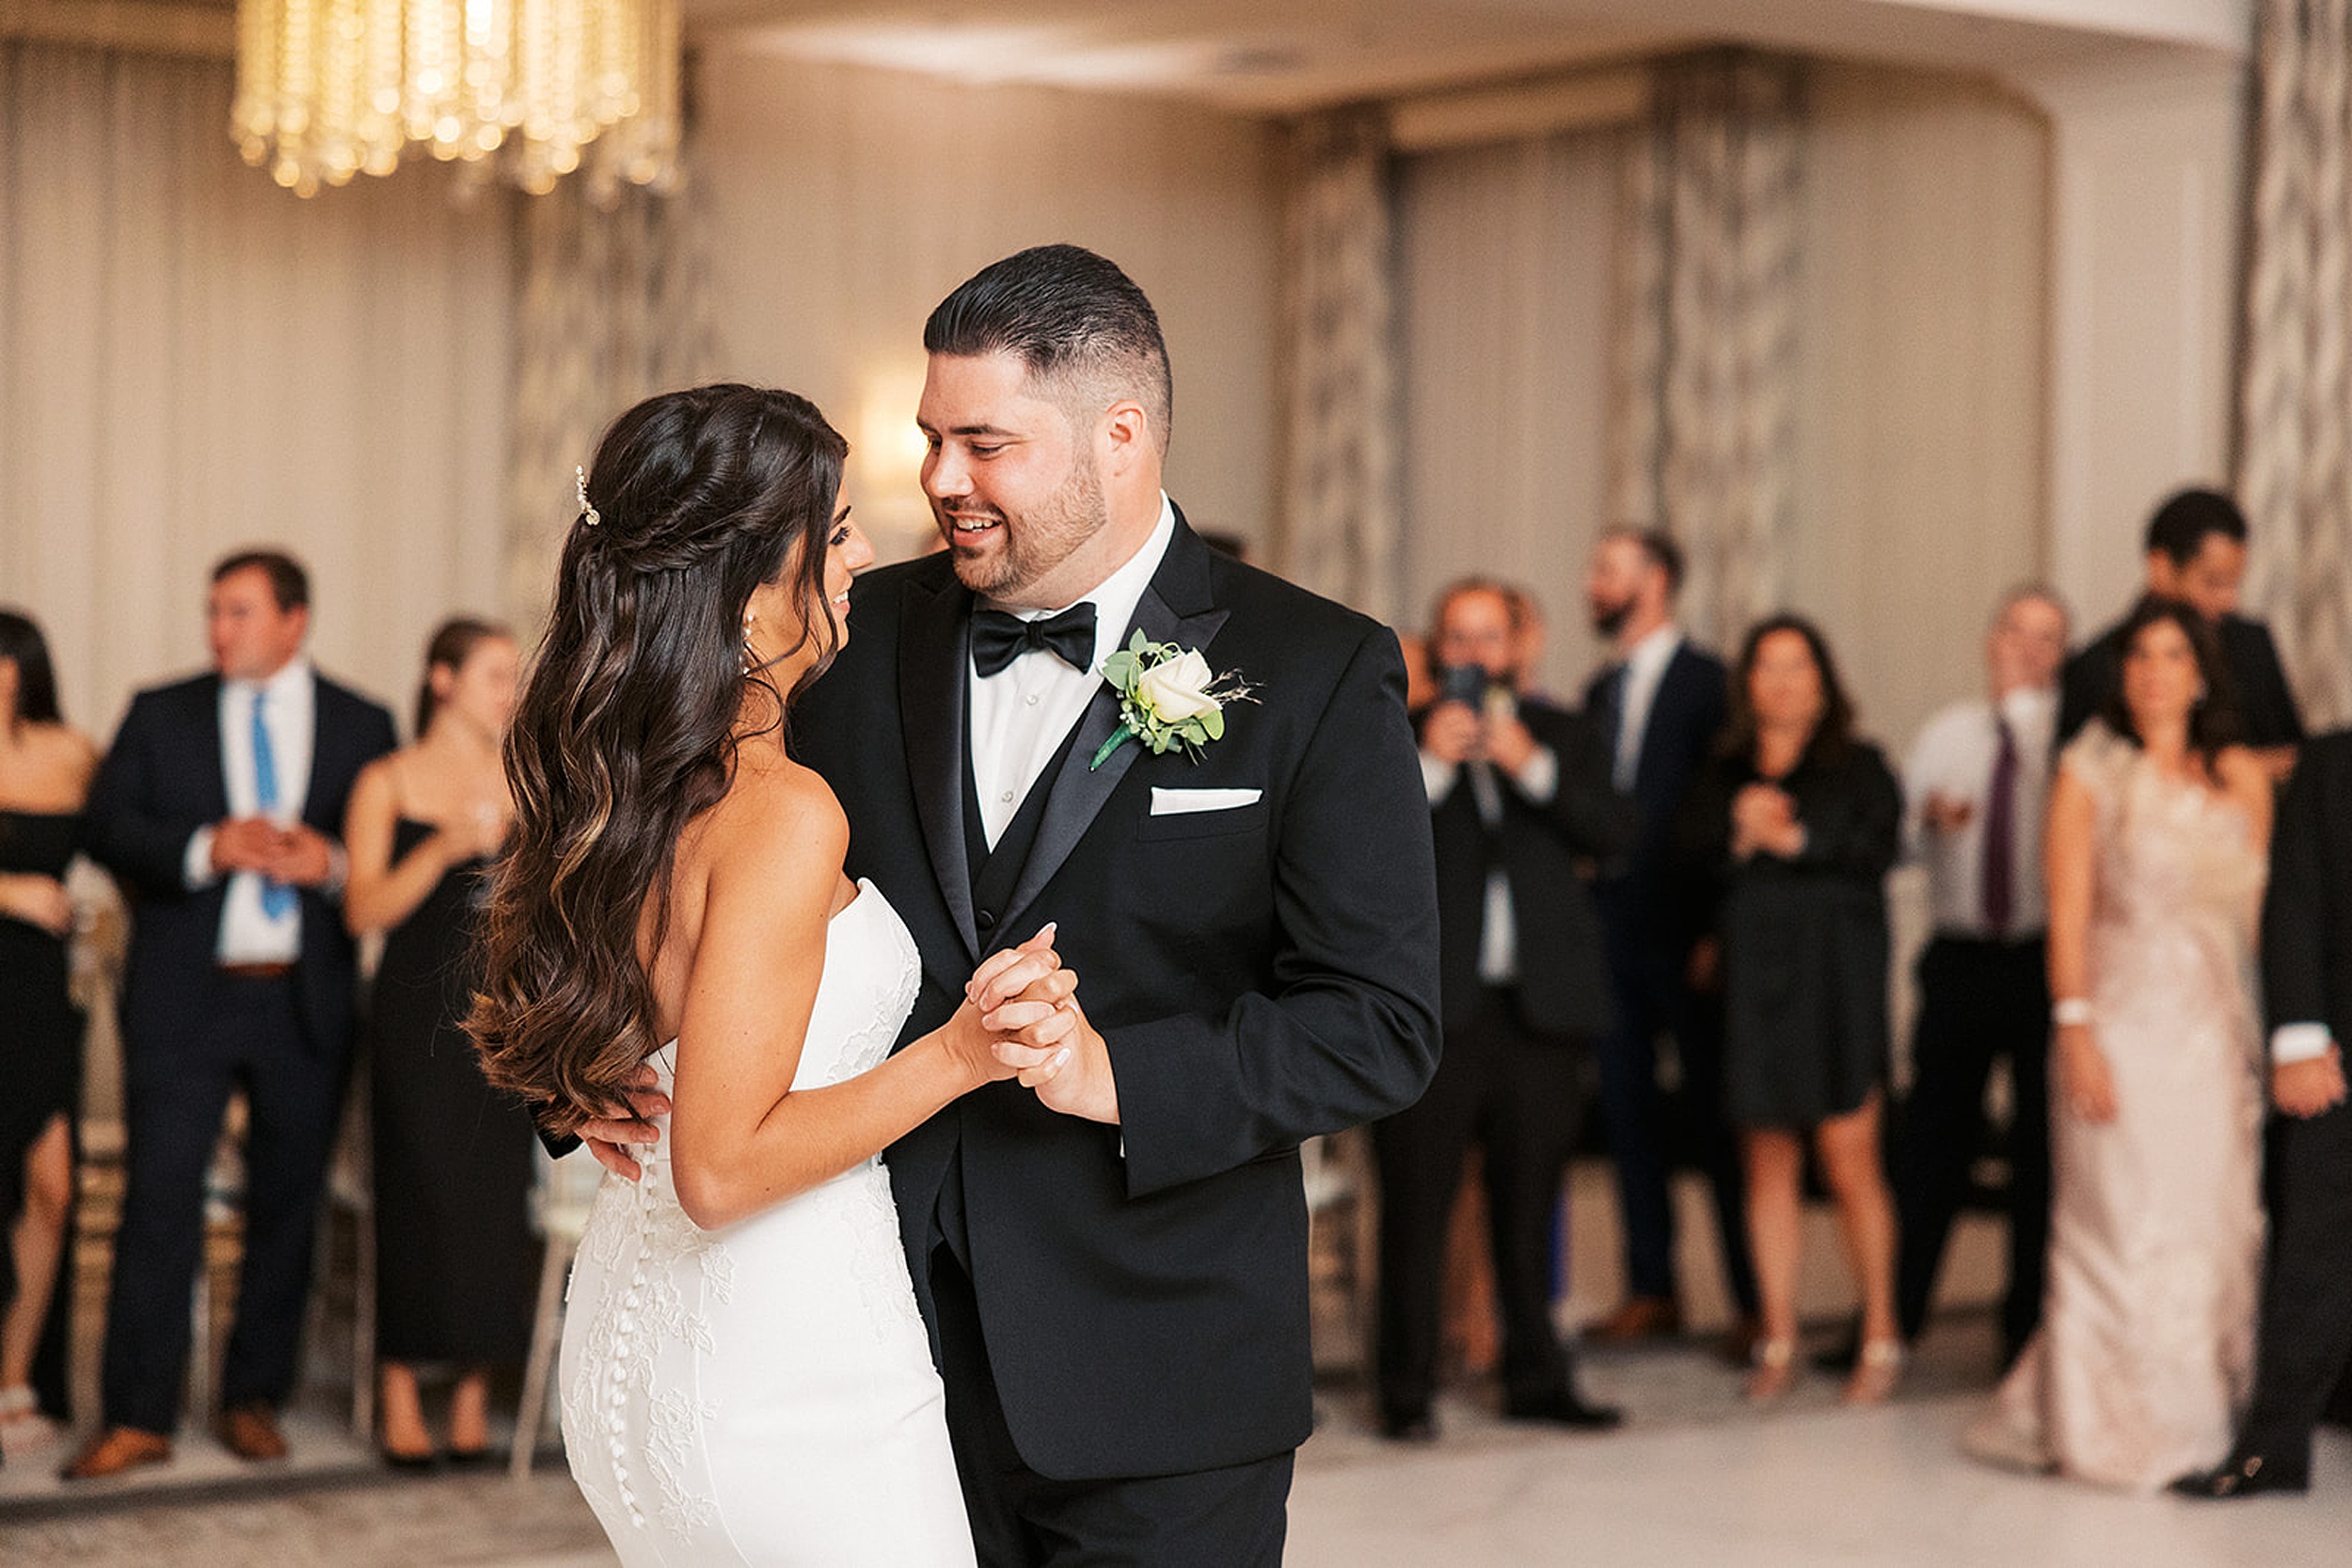 Newlyweds dance for the first time surrounded by guests at their edgewood country club wedding